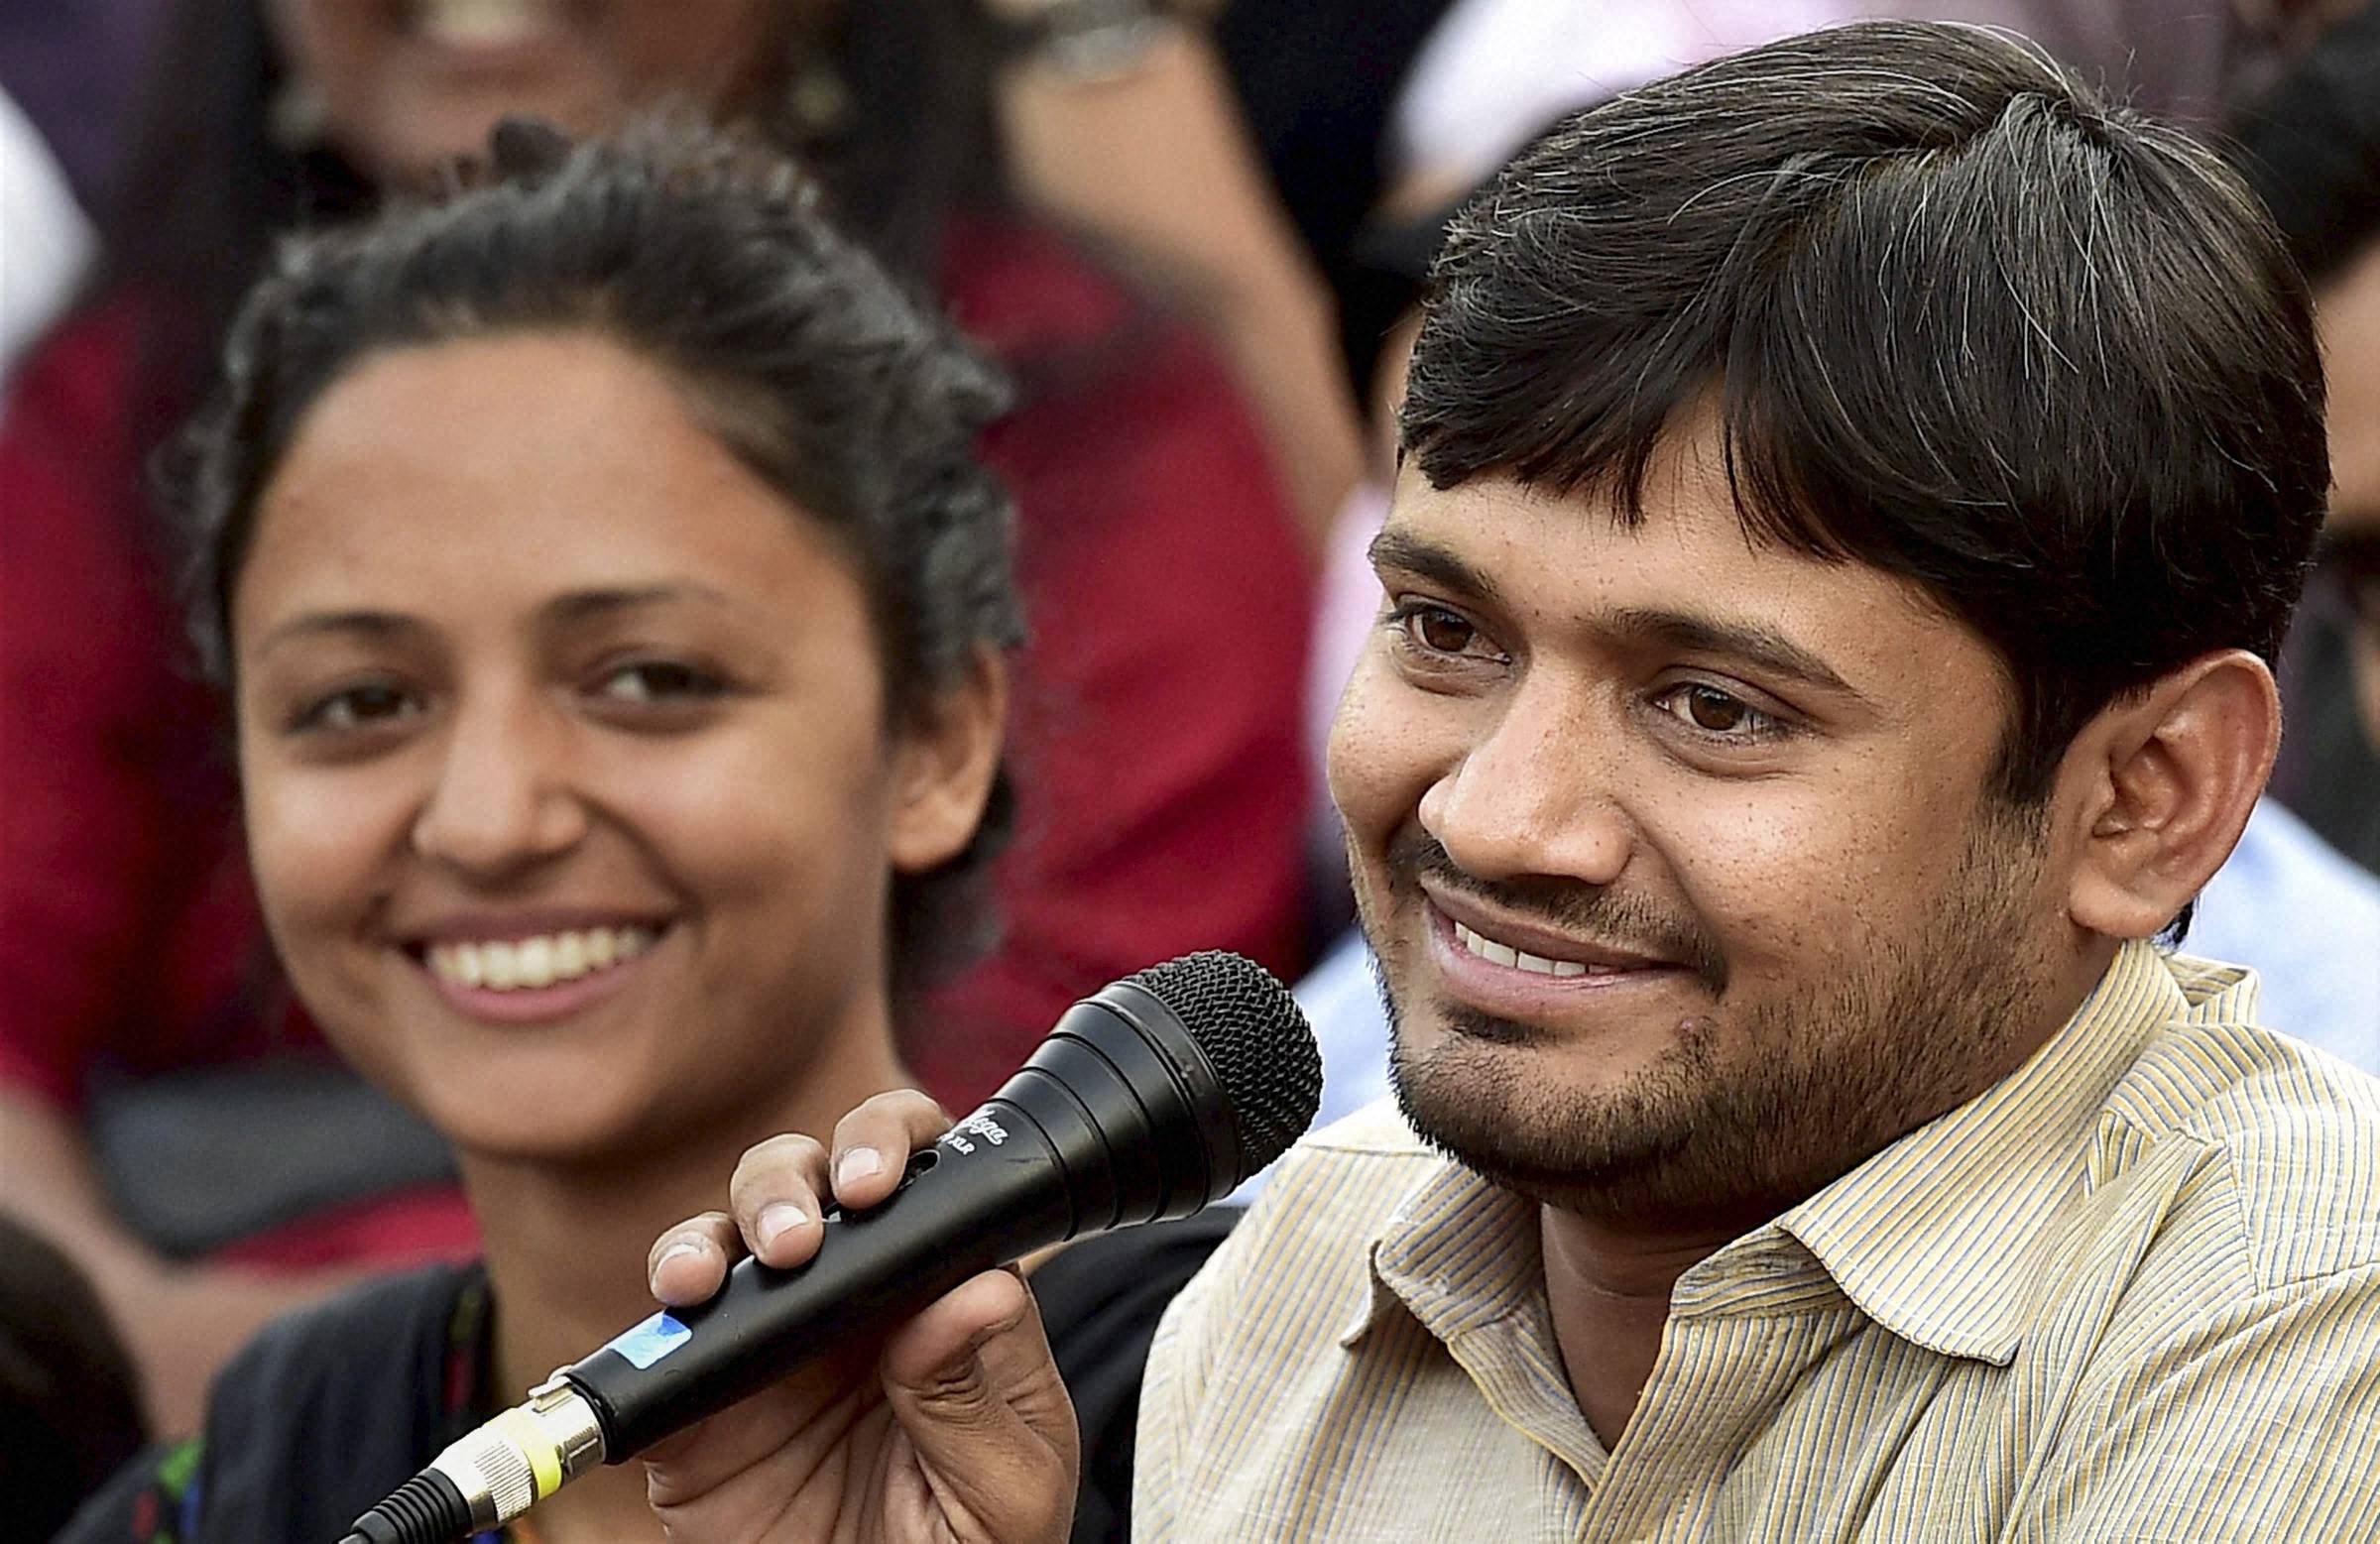 Institute In Pune Gets Packet With Explosives For Inviting Kanhaiya Kumar